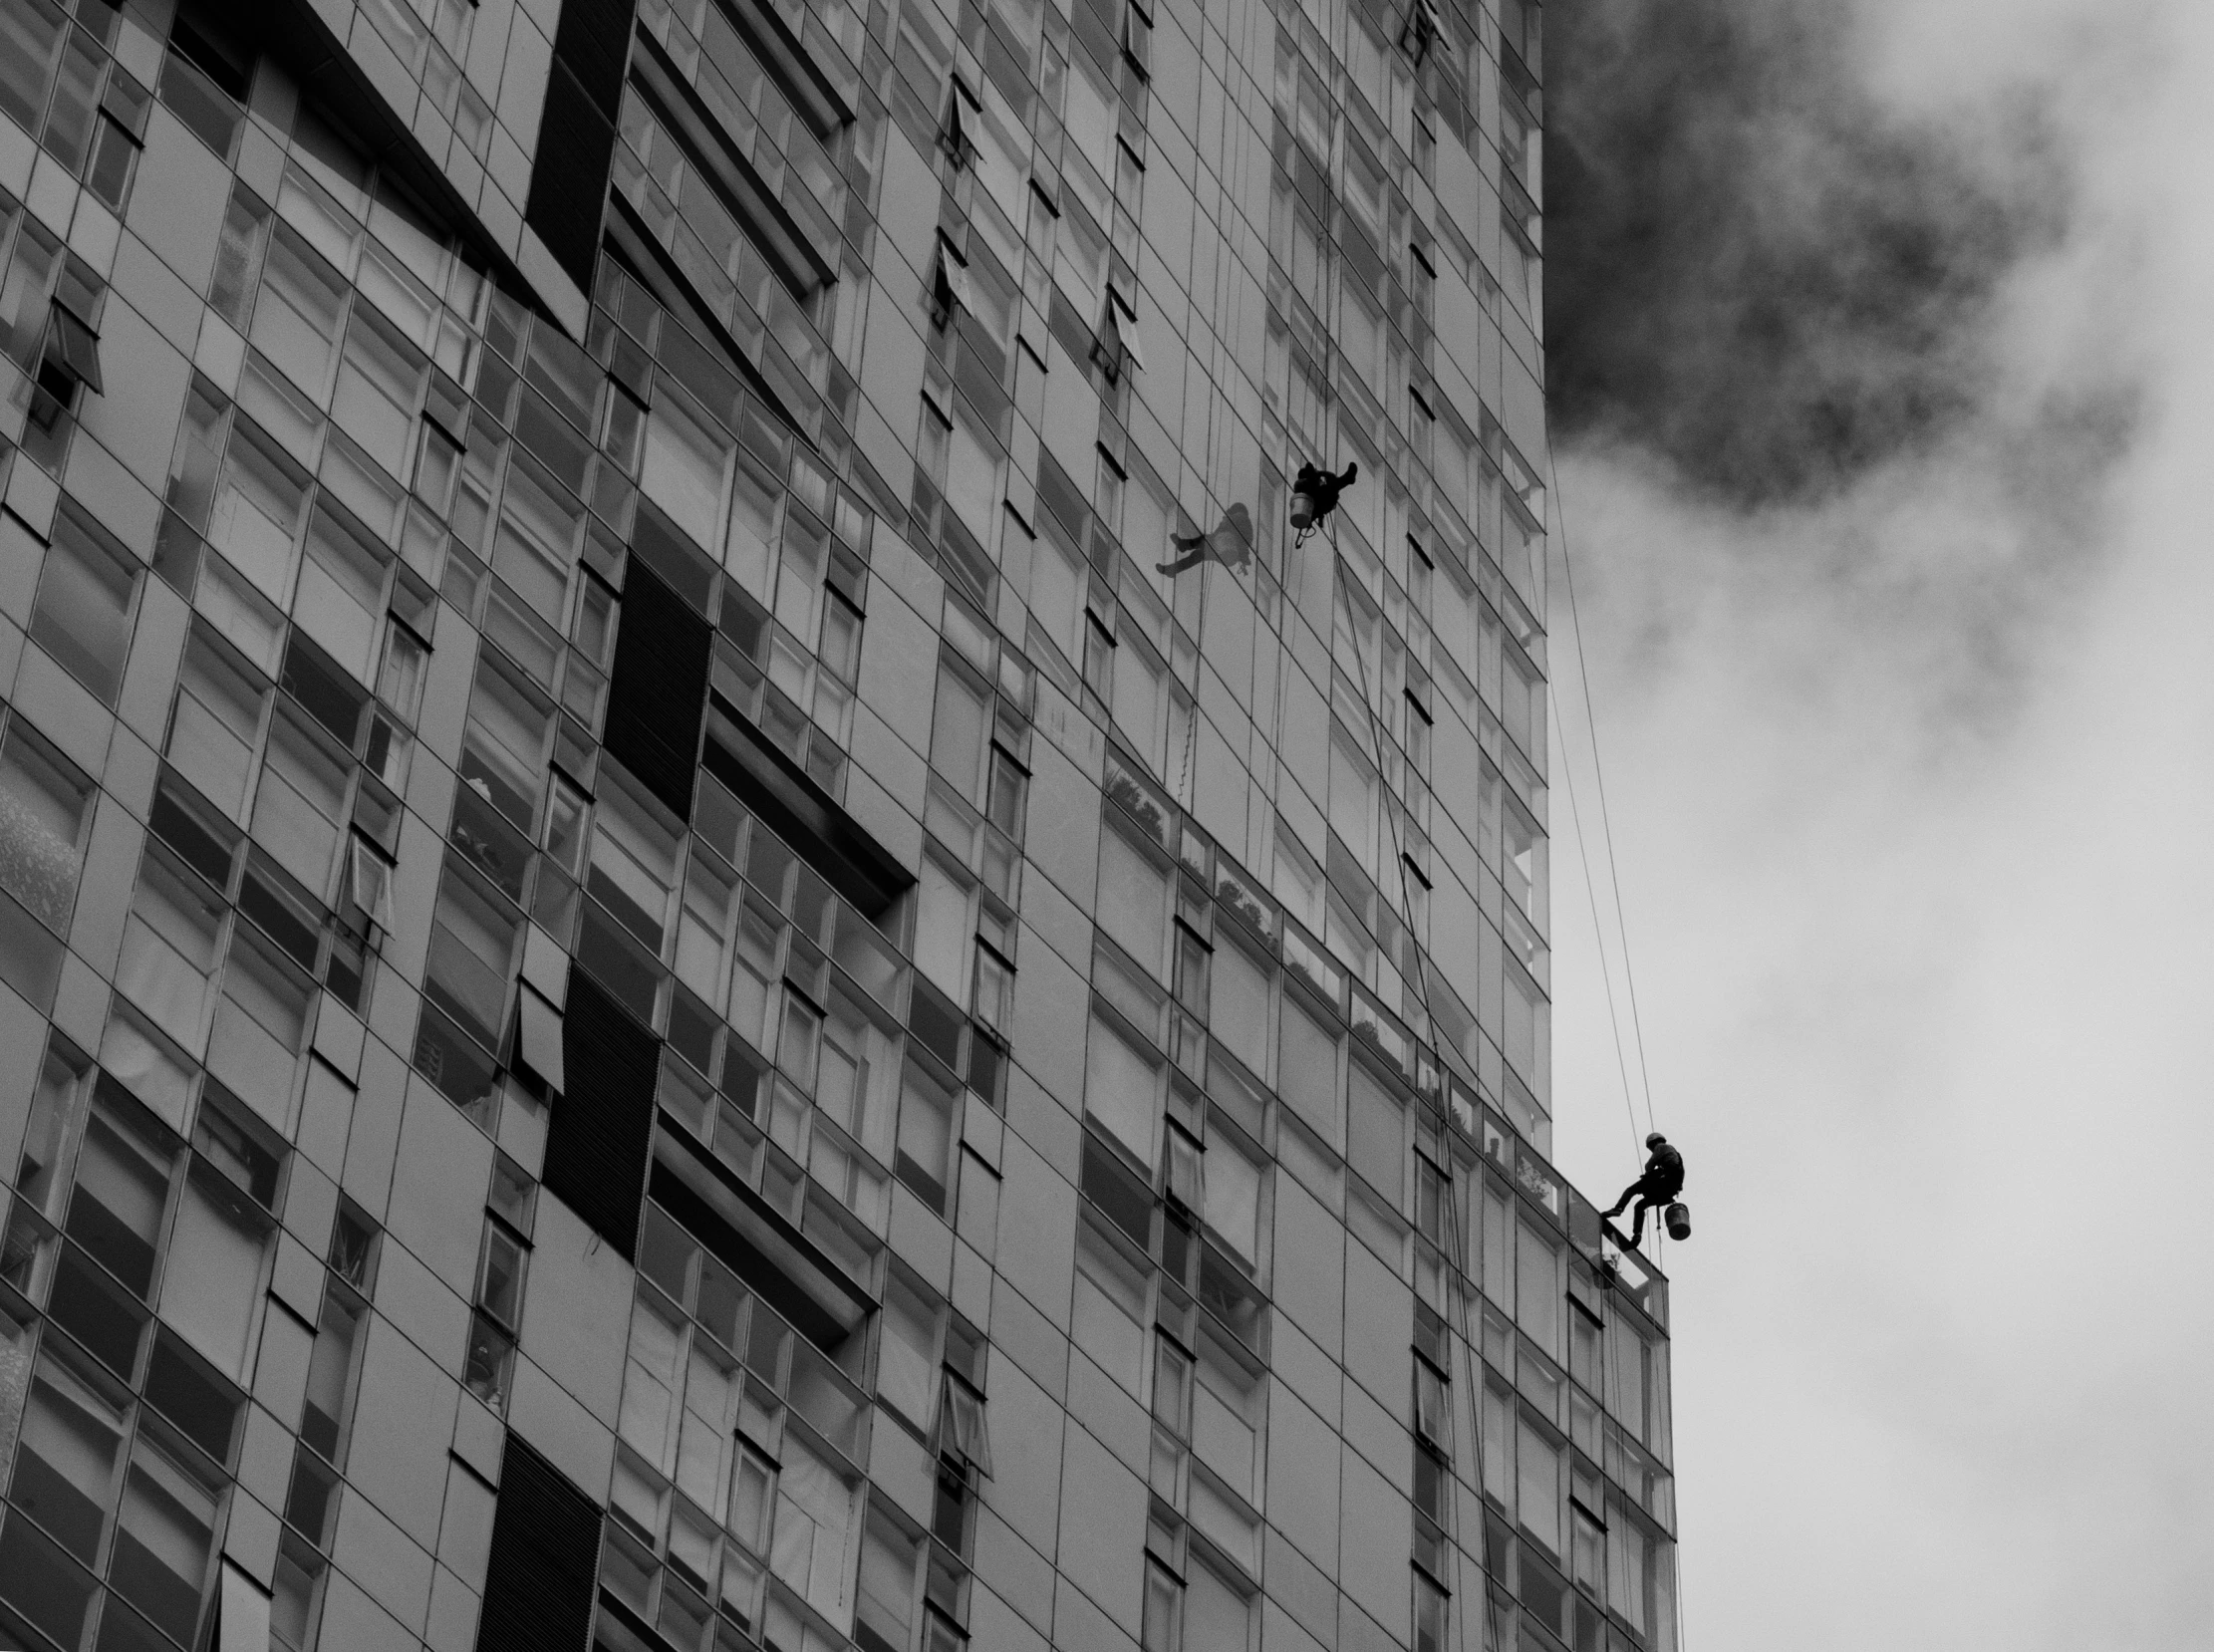 two men climbing up a wall while someone on a crane